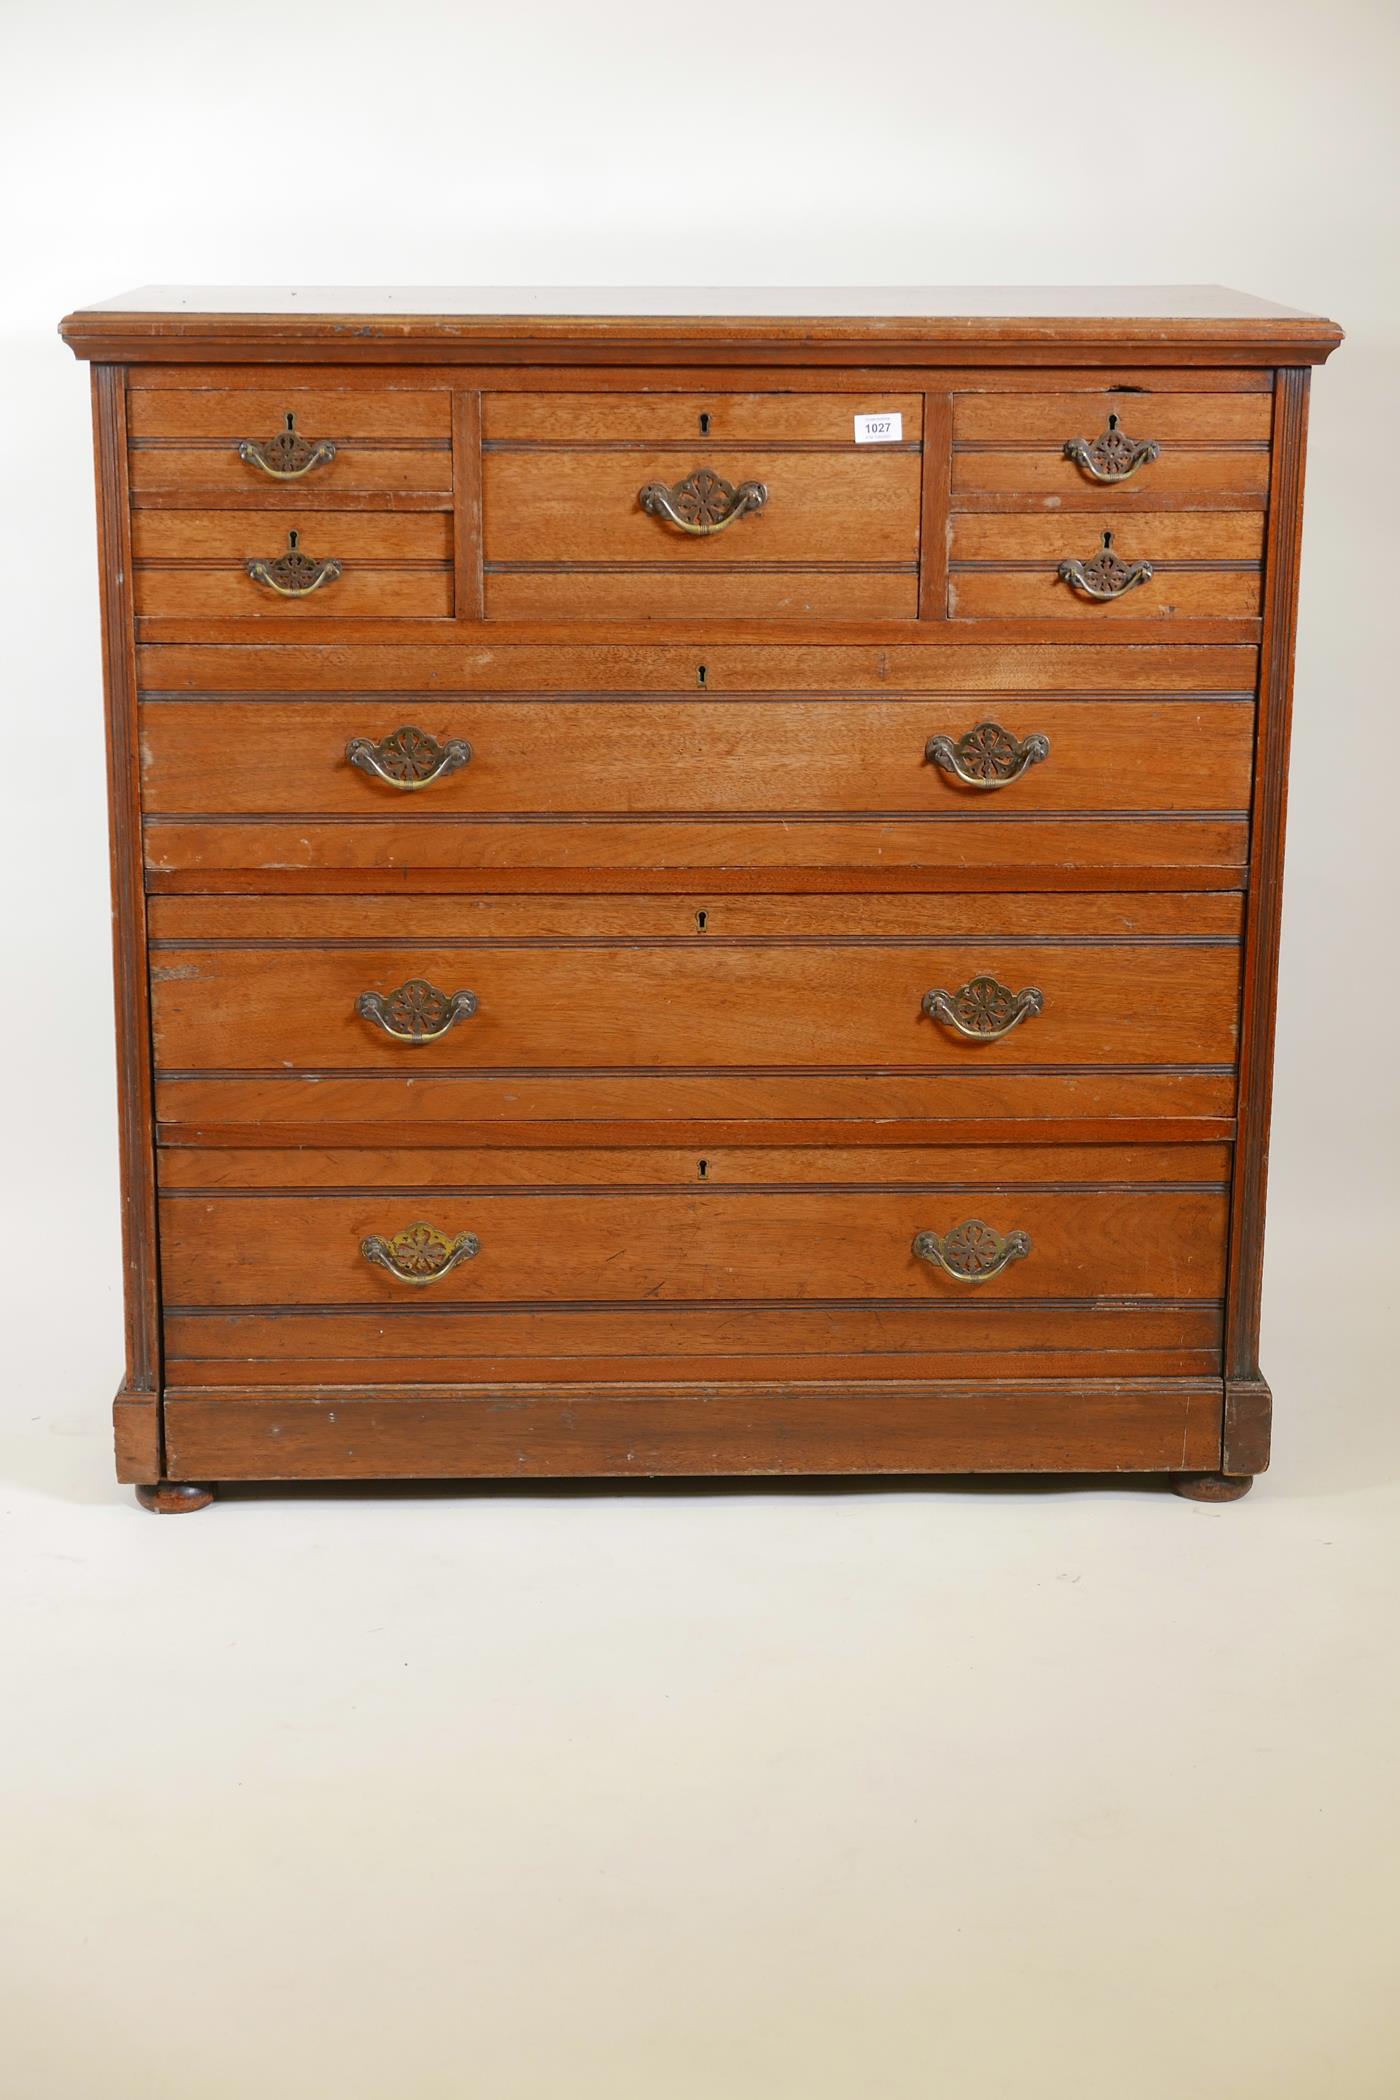 A 1920s walnut chest of drawers, five small over three long drawers, with reeded decoration, 41" x